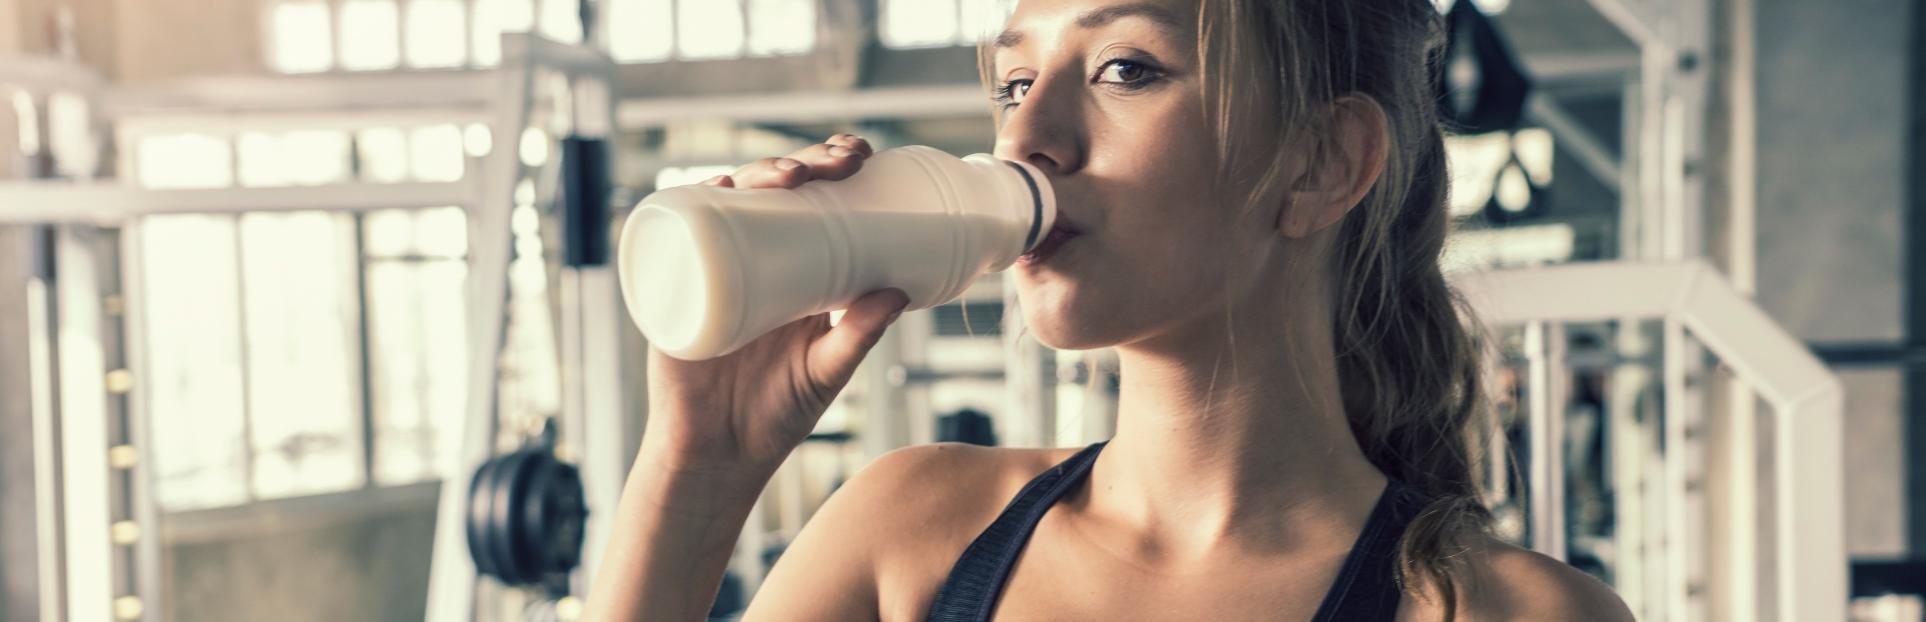 woman drinking beverage after workout